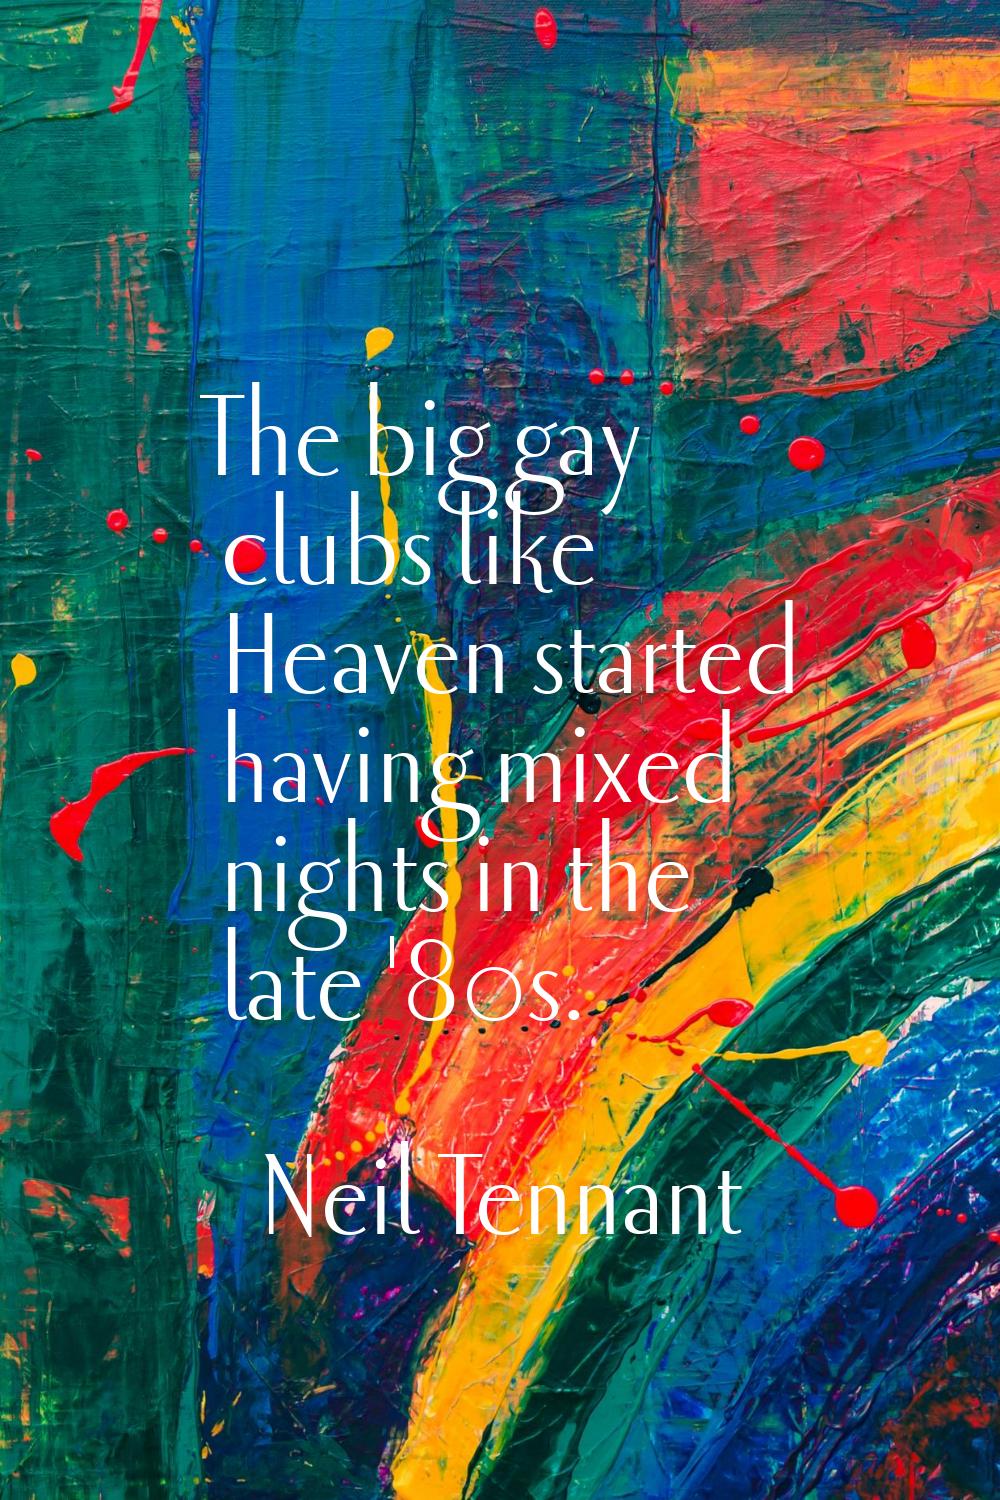 The big gay clubs like Heaven started having mixed nights in the late '80s.